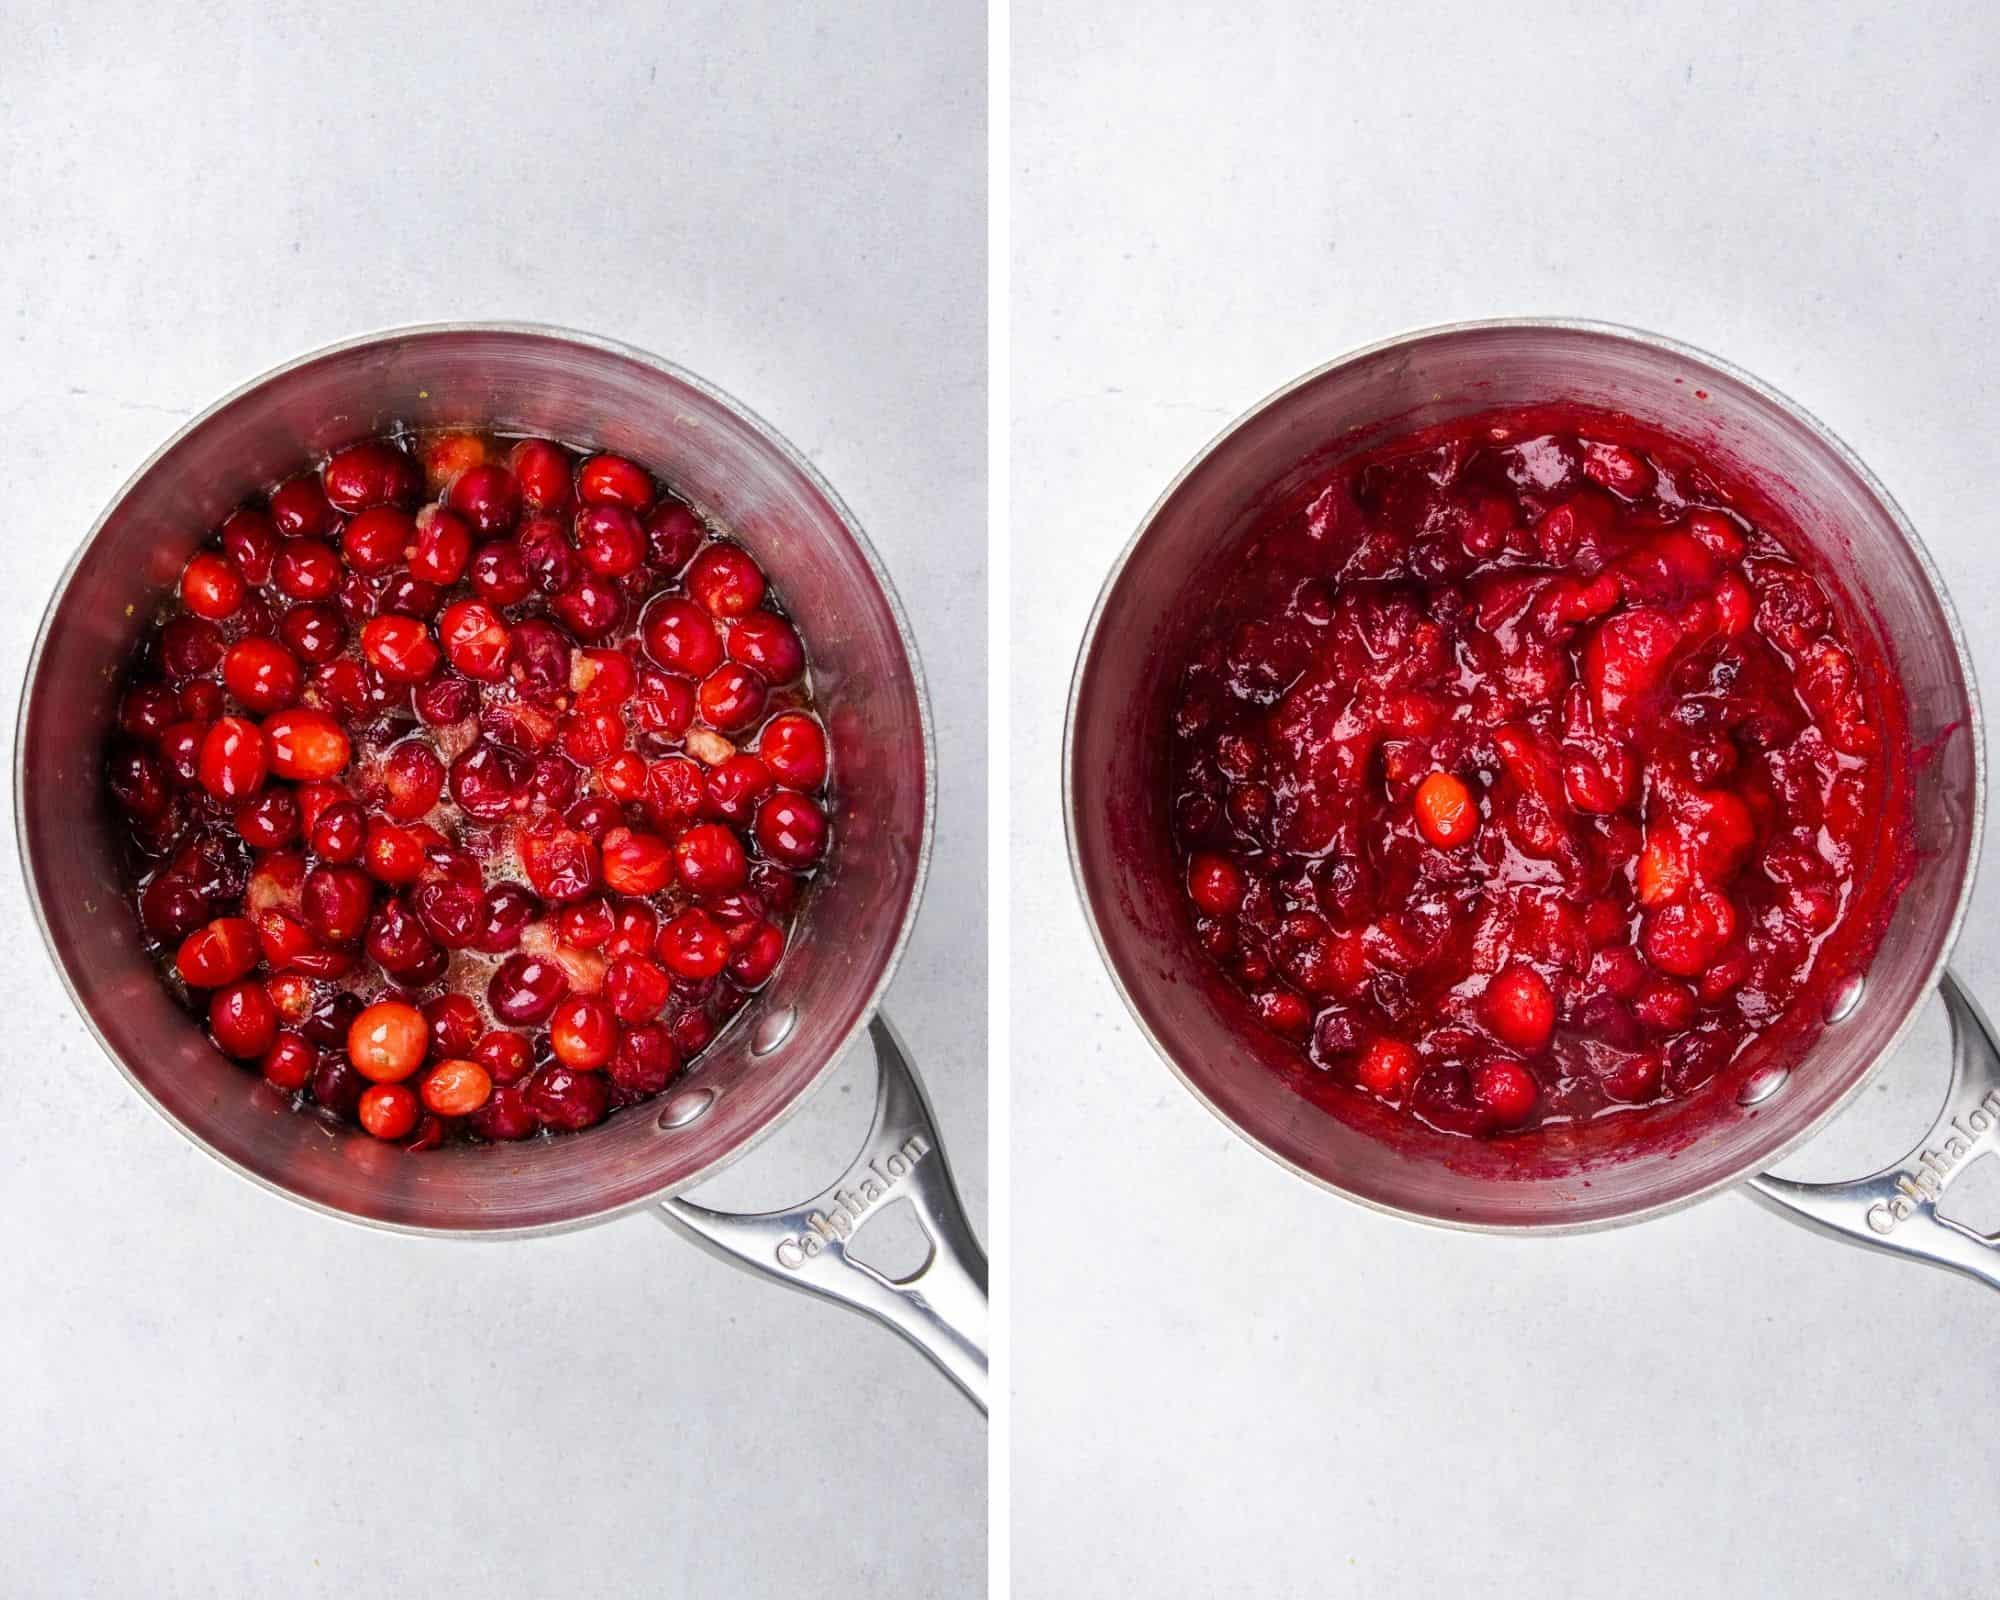 Cranberry sauce in a sauce pan during and after cooking.